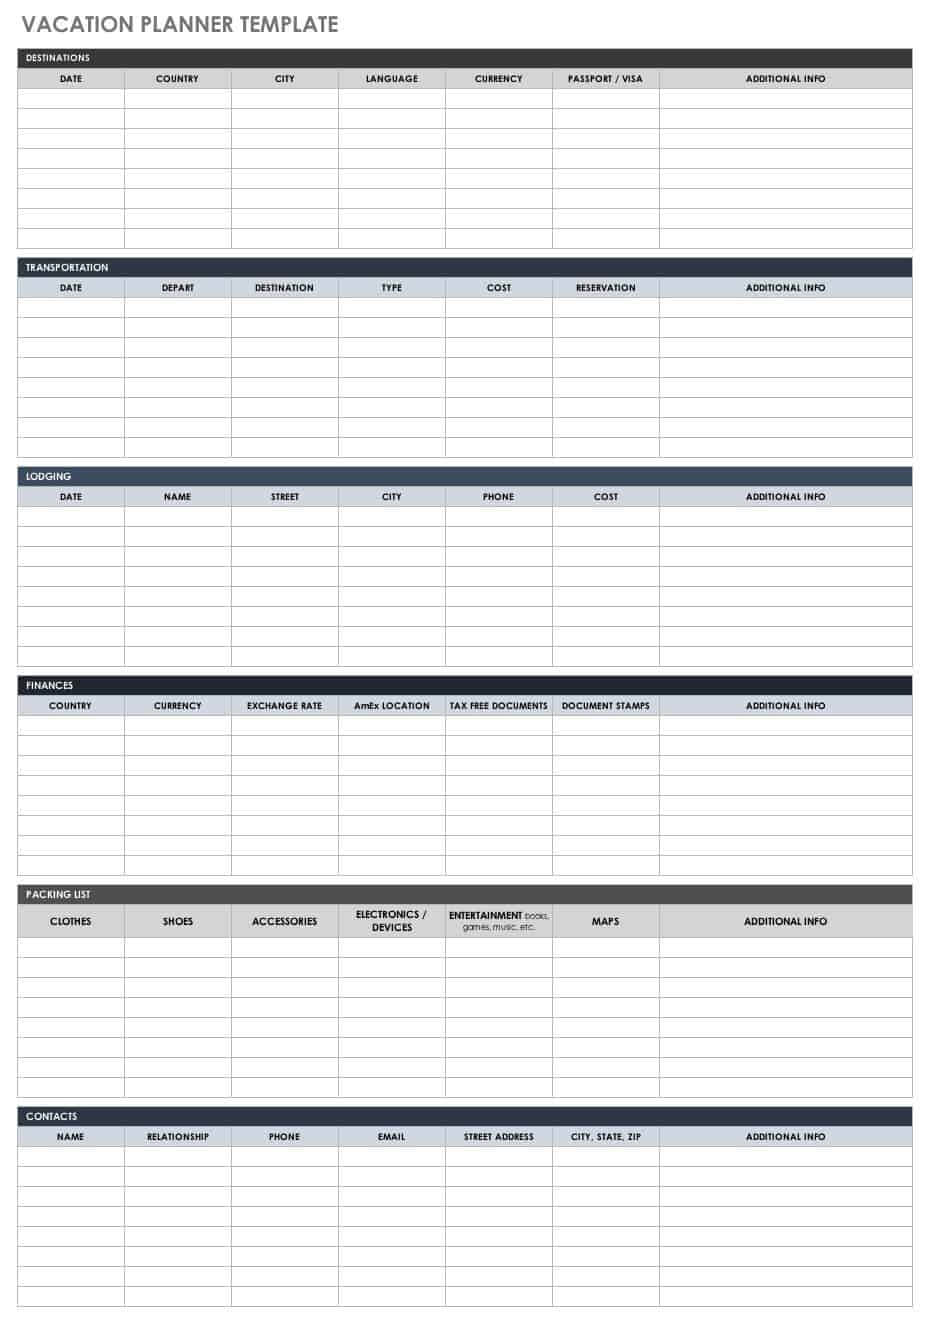 Free Itinerary Templates | Smartsheet With Regard To Blank Trip Itinerary Template